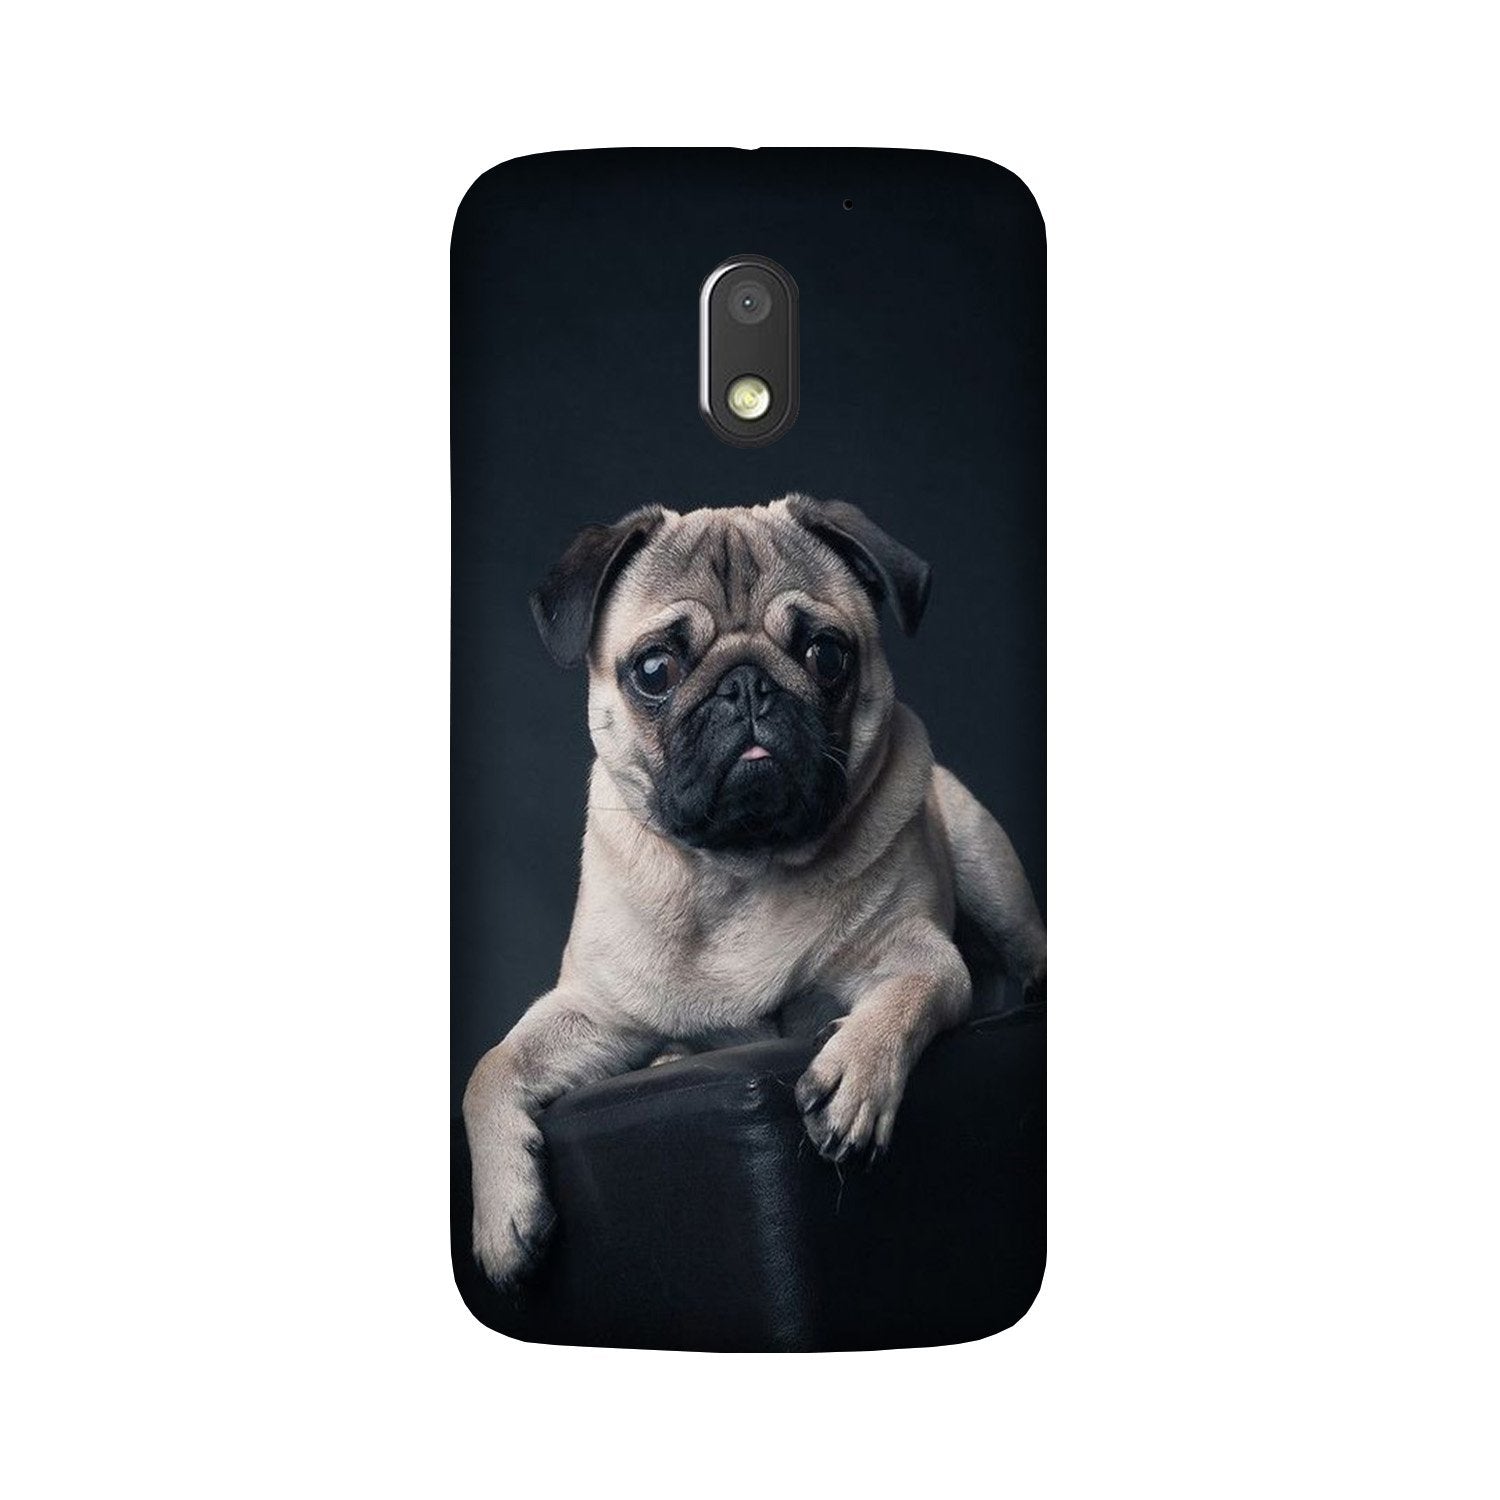 little Puppy Case for Moto G4 Play